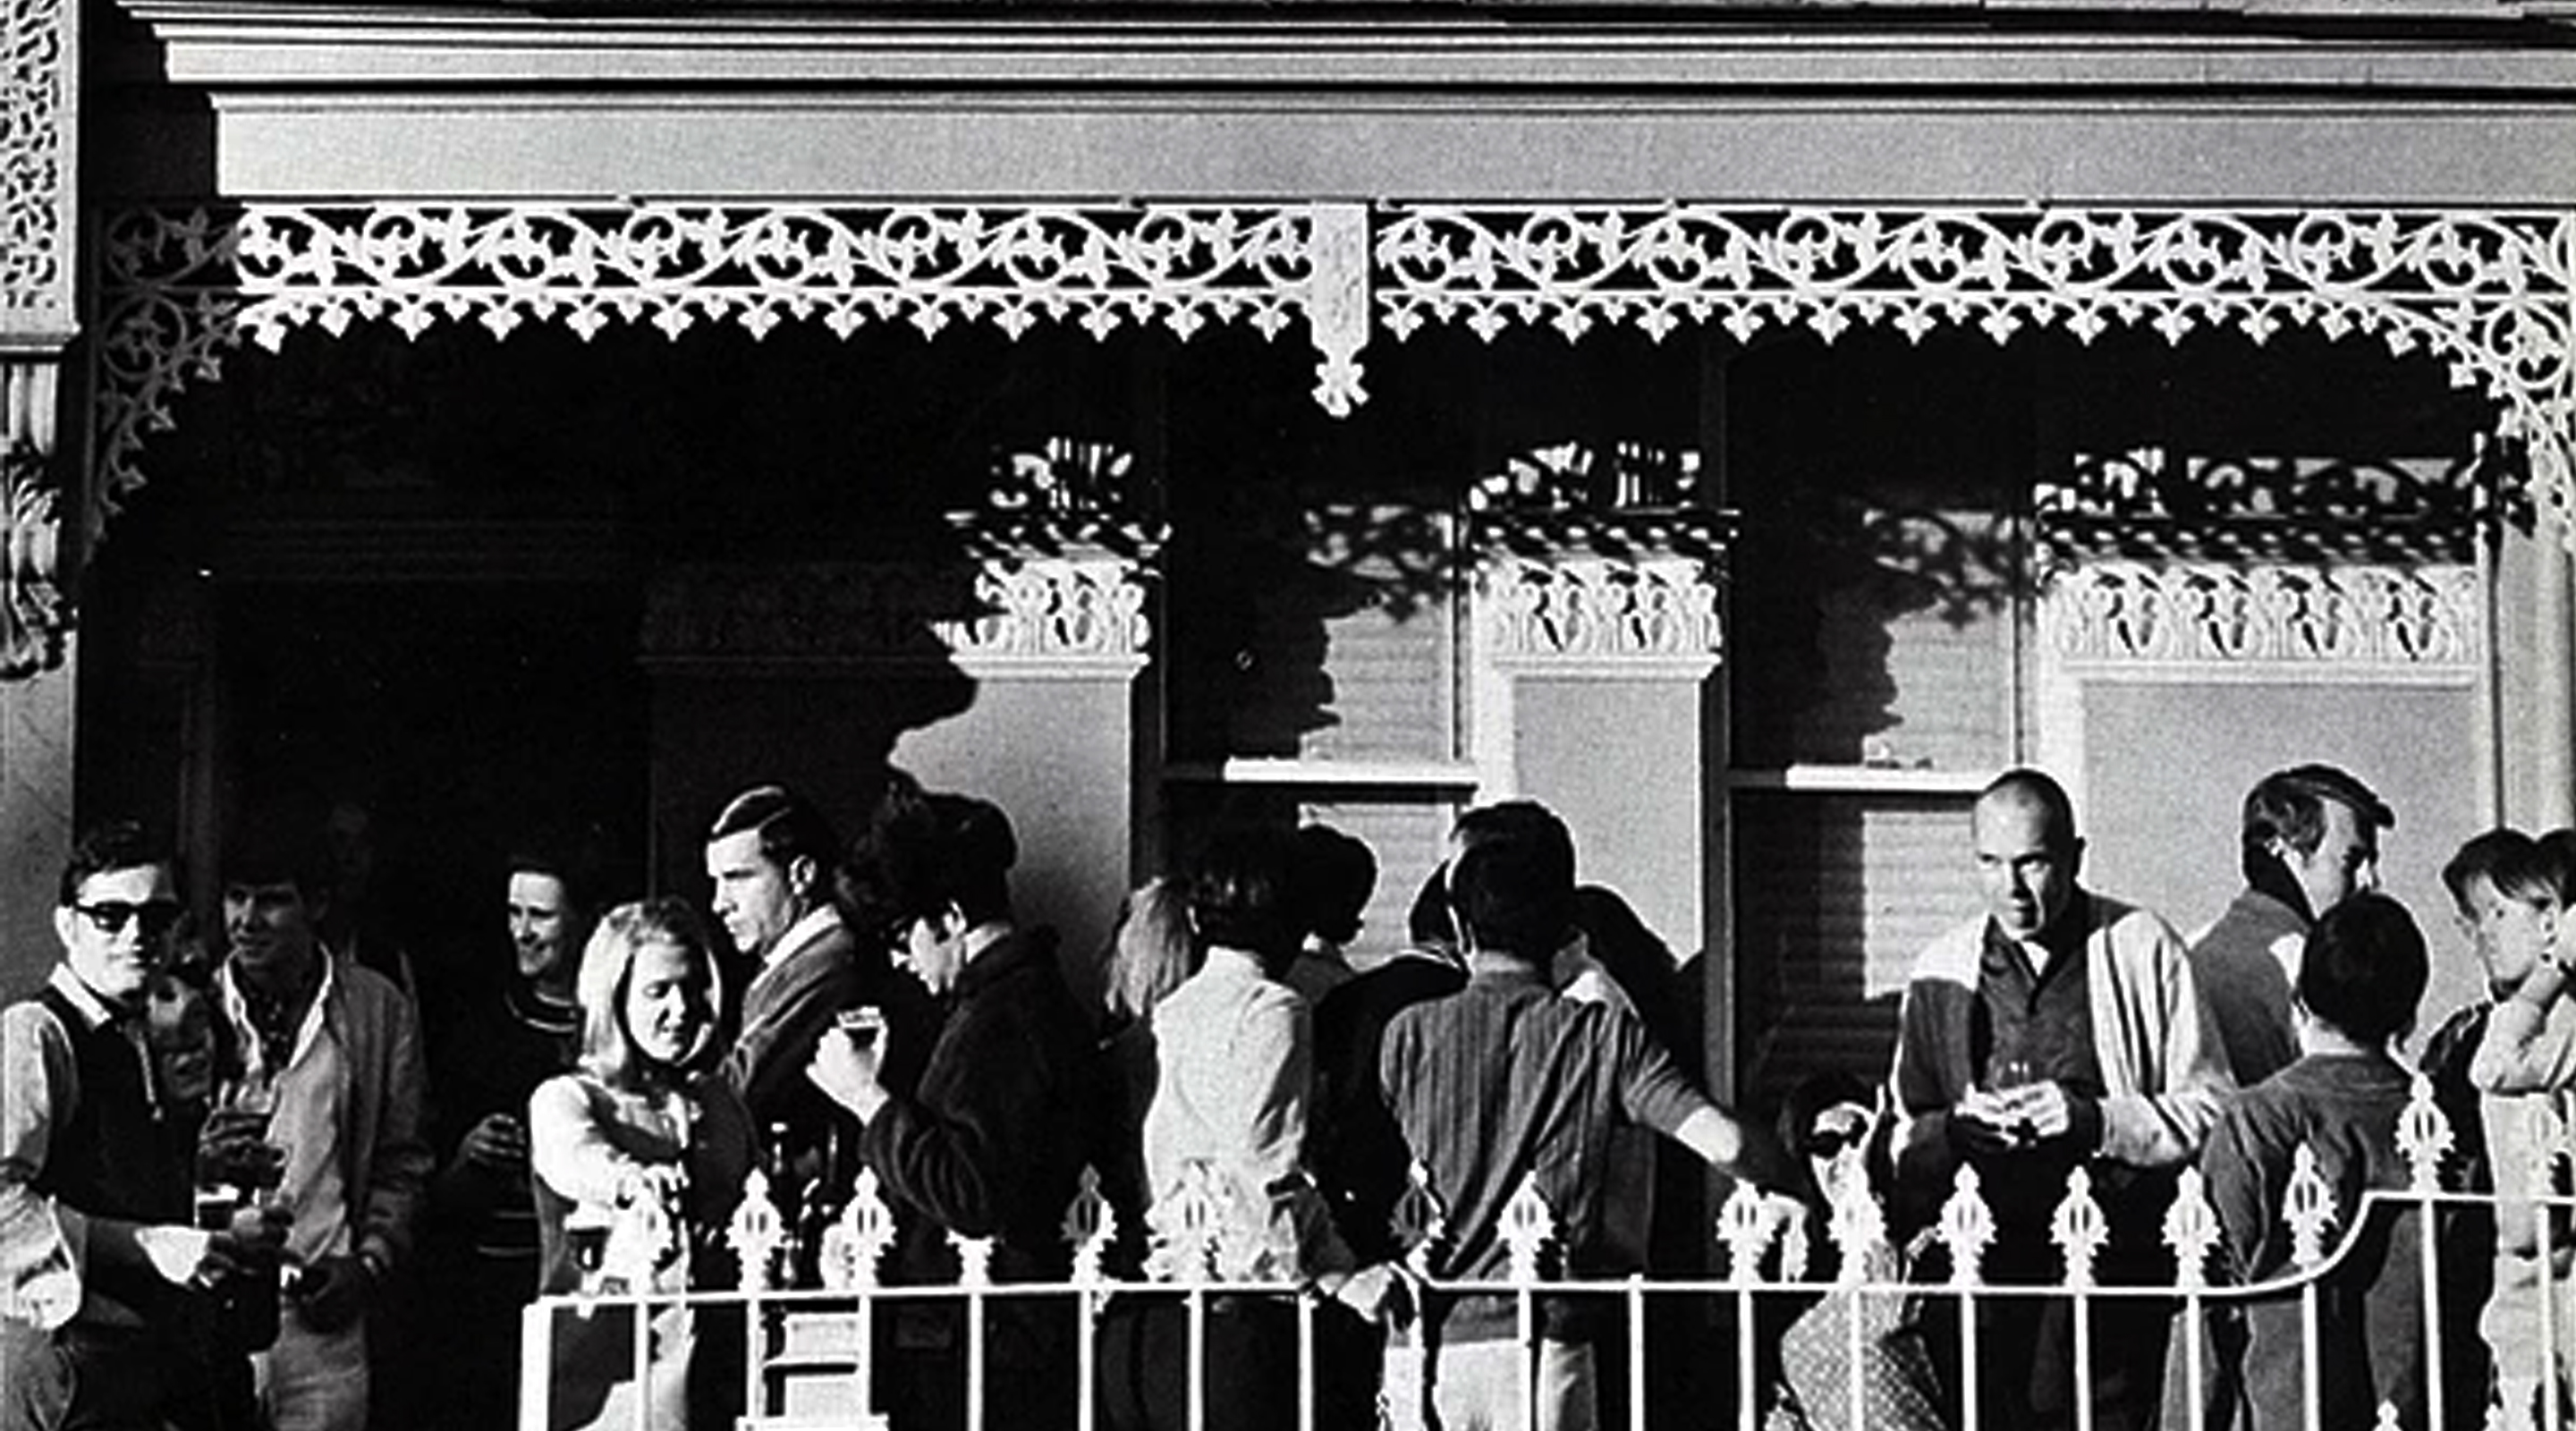 People gathered on a terrace balcony